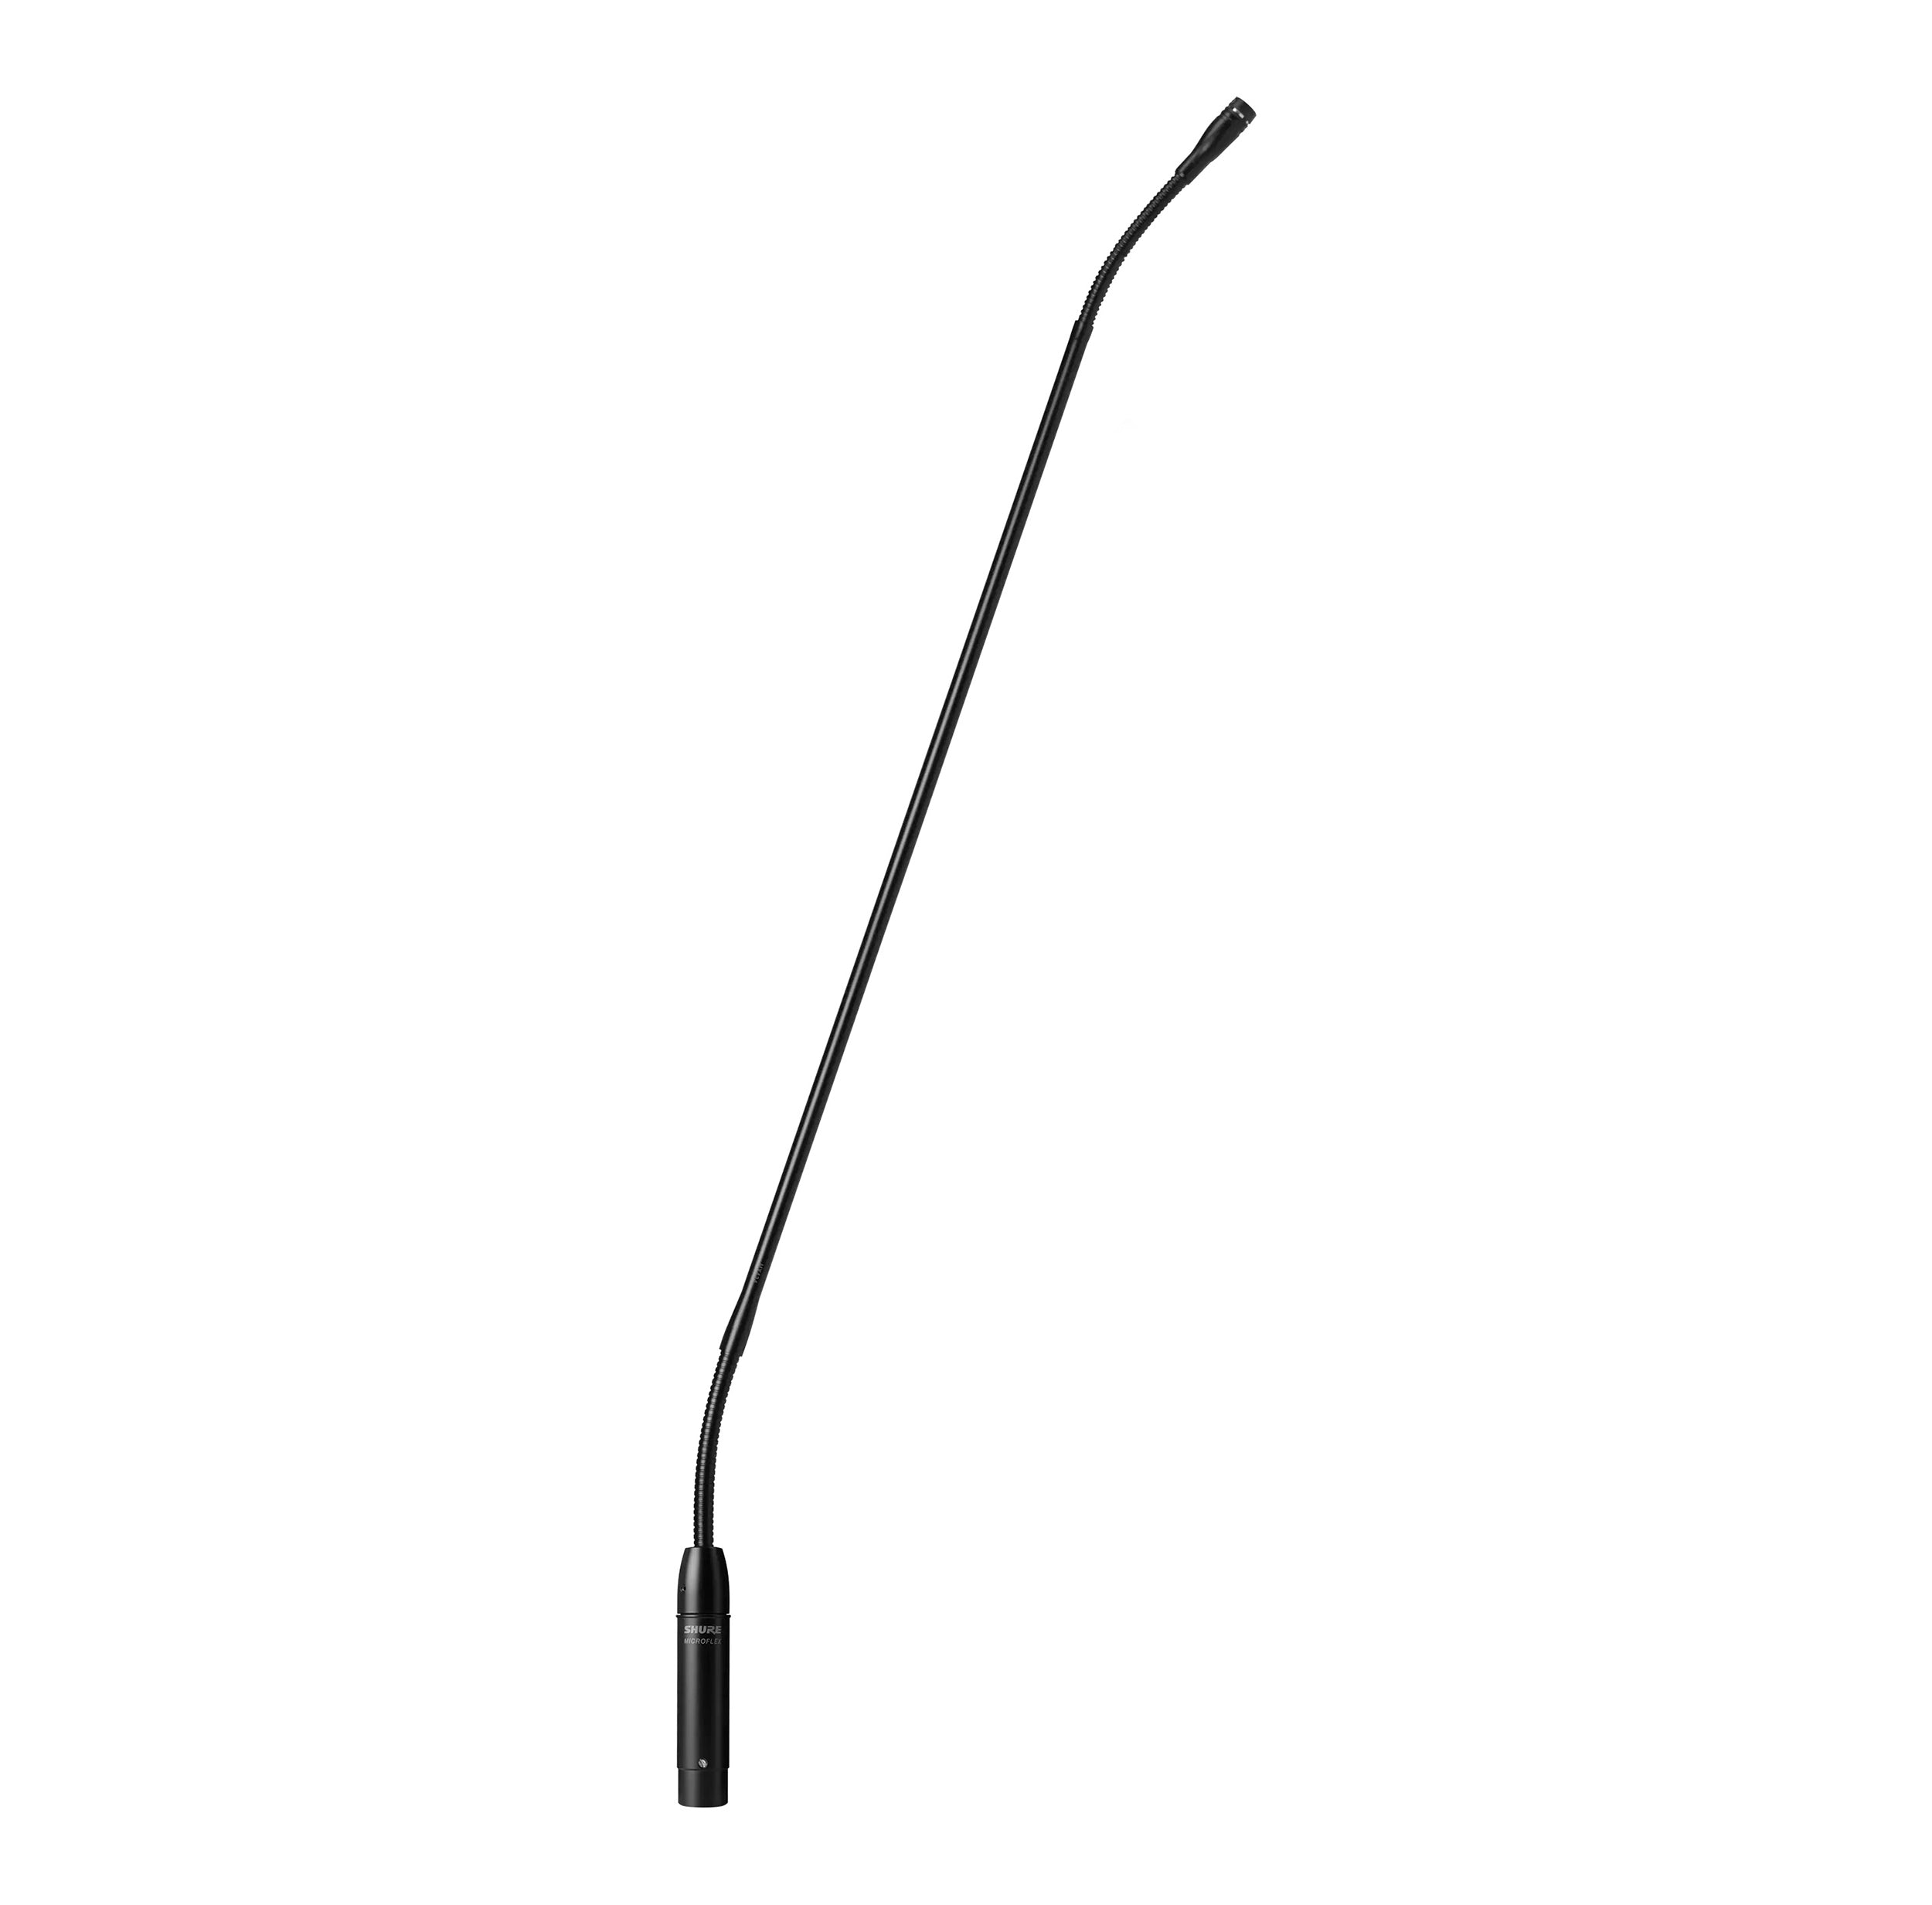 Shure MX424/S, 24-Inch Micro Flex Super Cardioid Gooseneck Condenser Microphone with Preamp by Shure